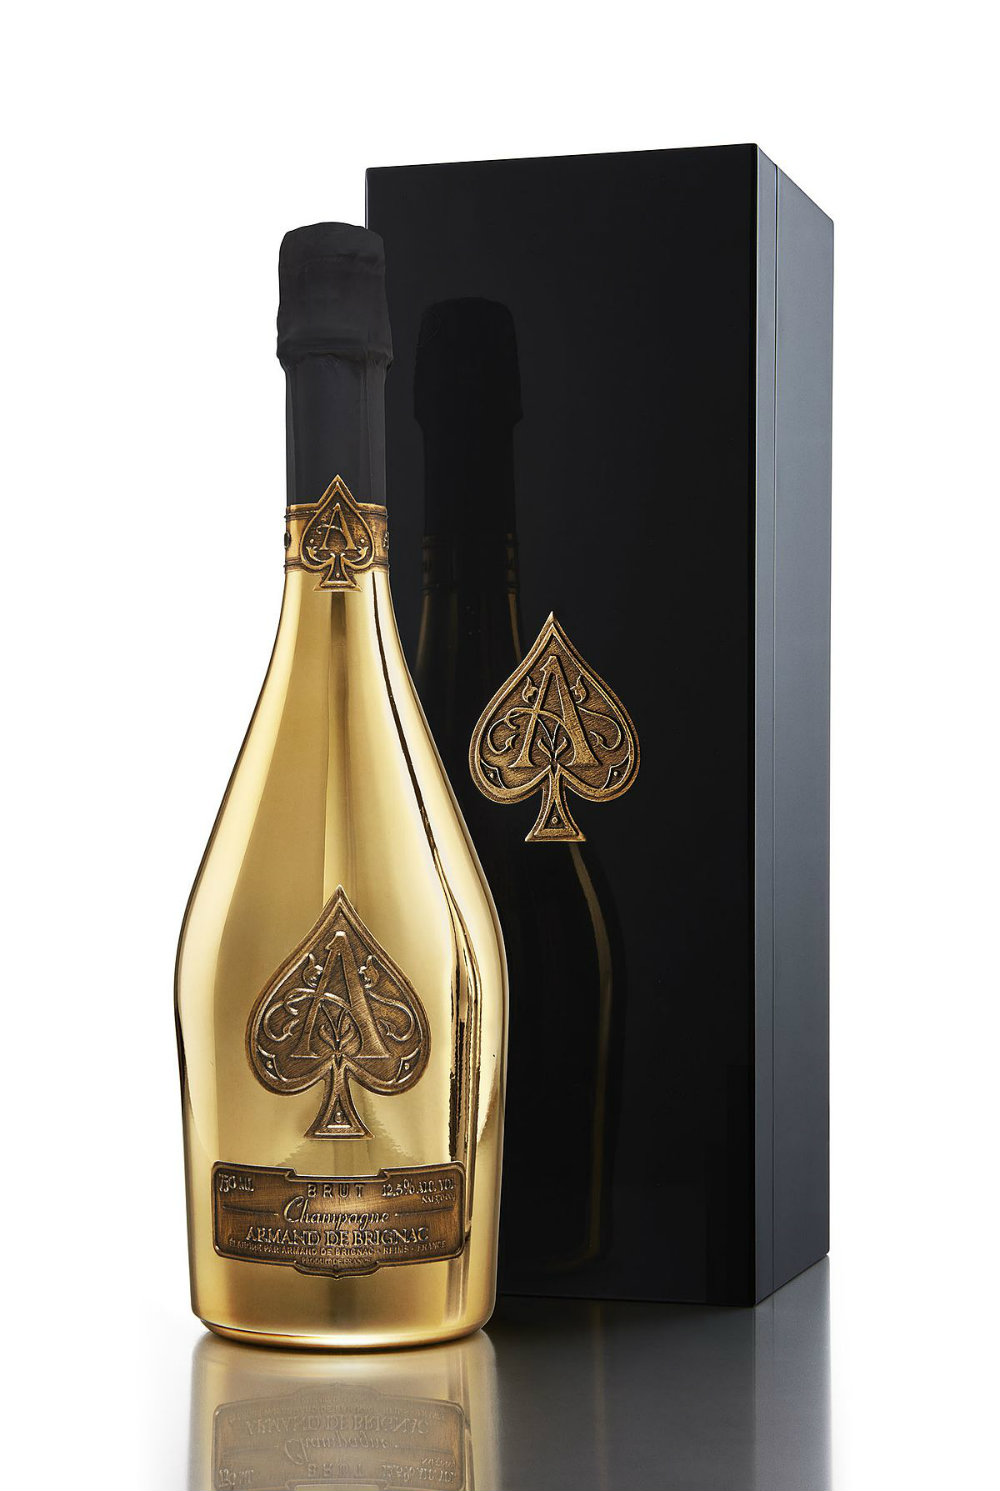 Top 5 Most Expensive Champagne Bottles In The World 04